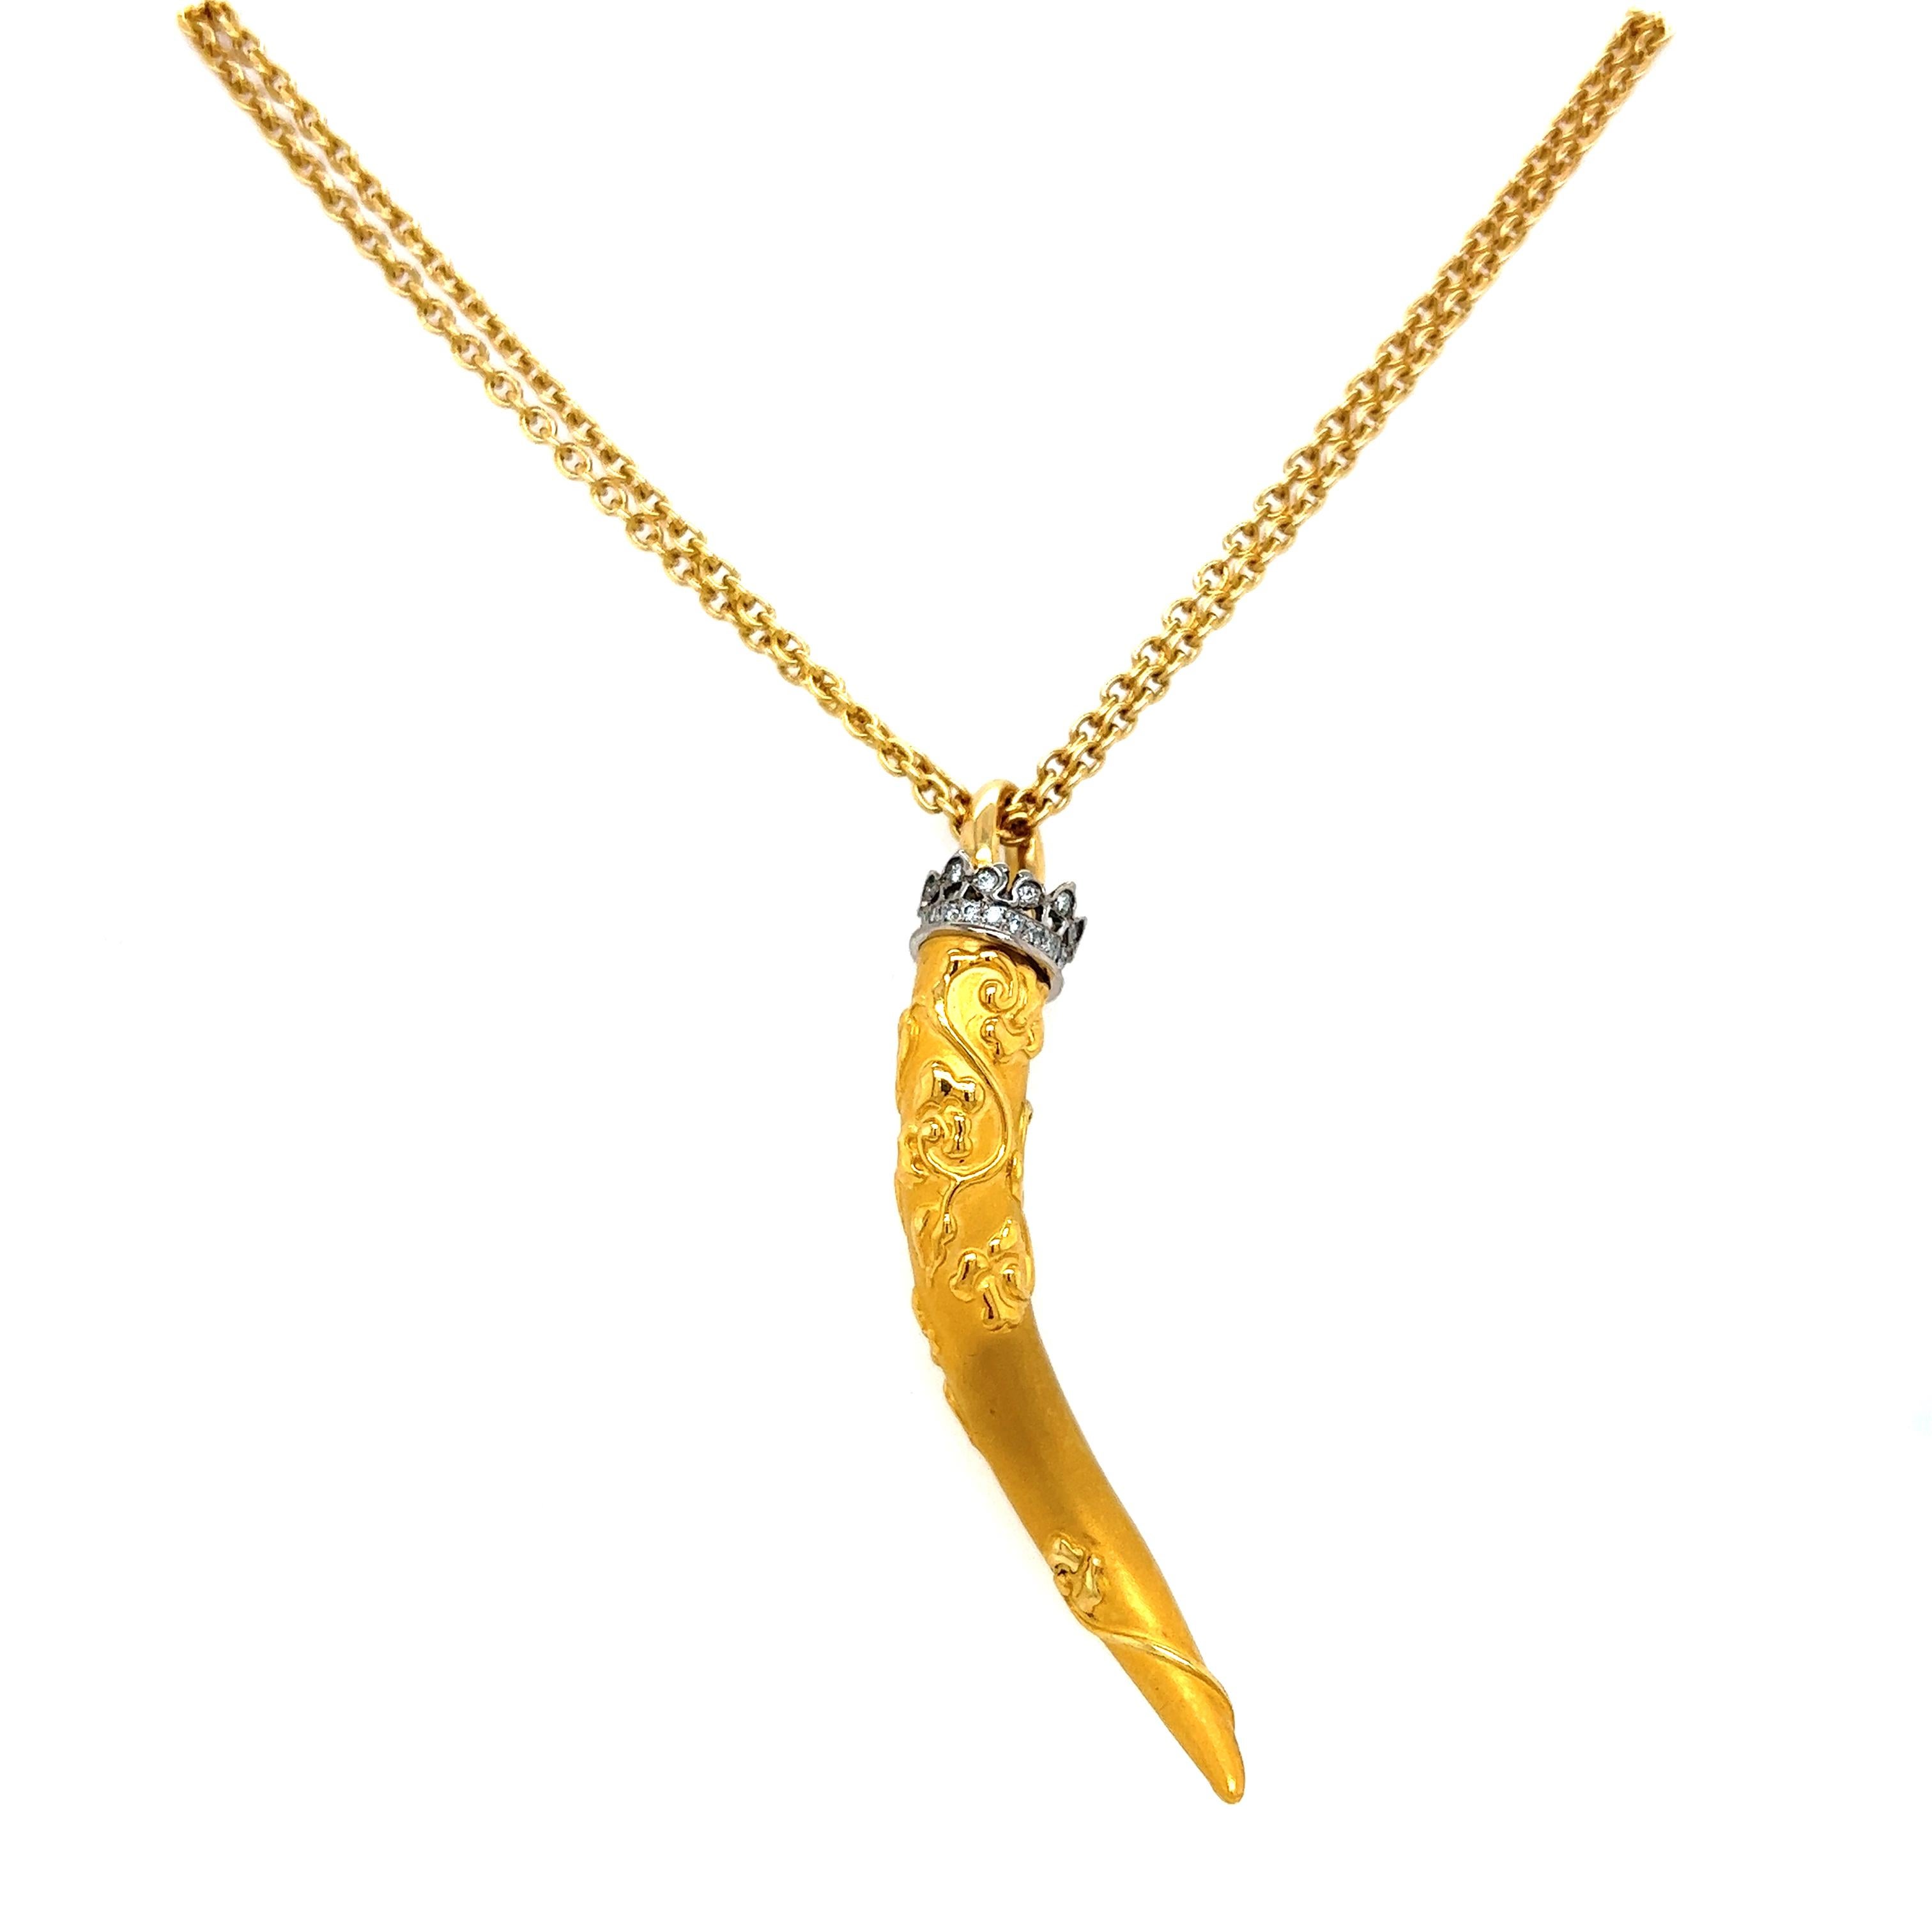    One of a kind design from famed designer Carrera y Carrera. The necklace is crafted in the form of a large decorative cornicello Italian horn. 
   Known for their detailed finishing this pendant necklace is no different the horn is crafted in